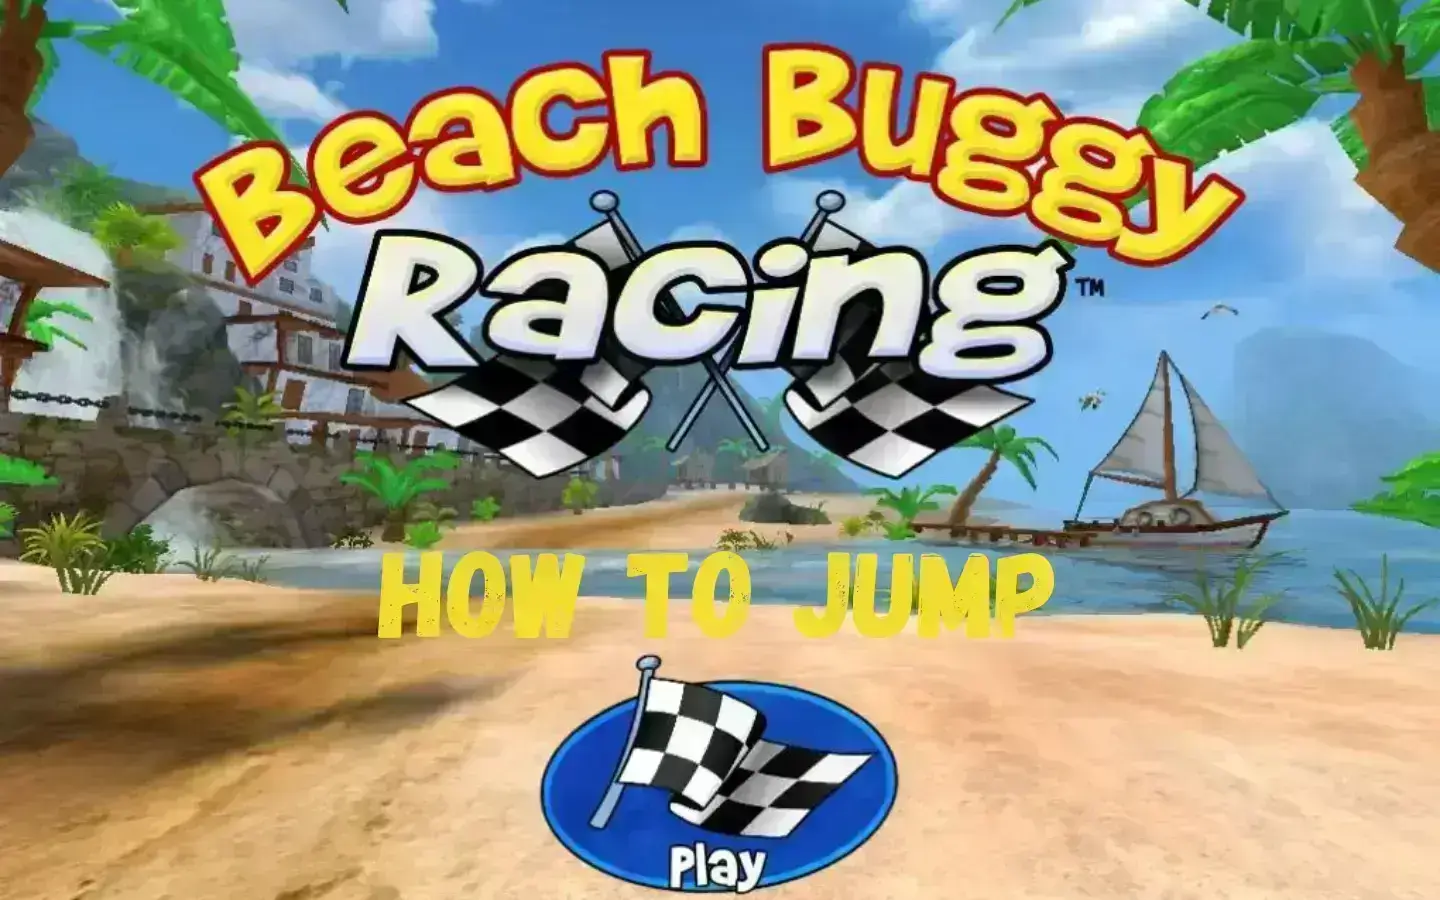 How-to-Launch-in-Beach-Buggy-Racing